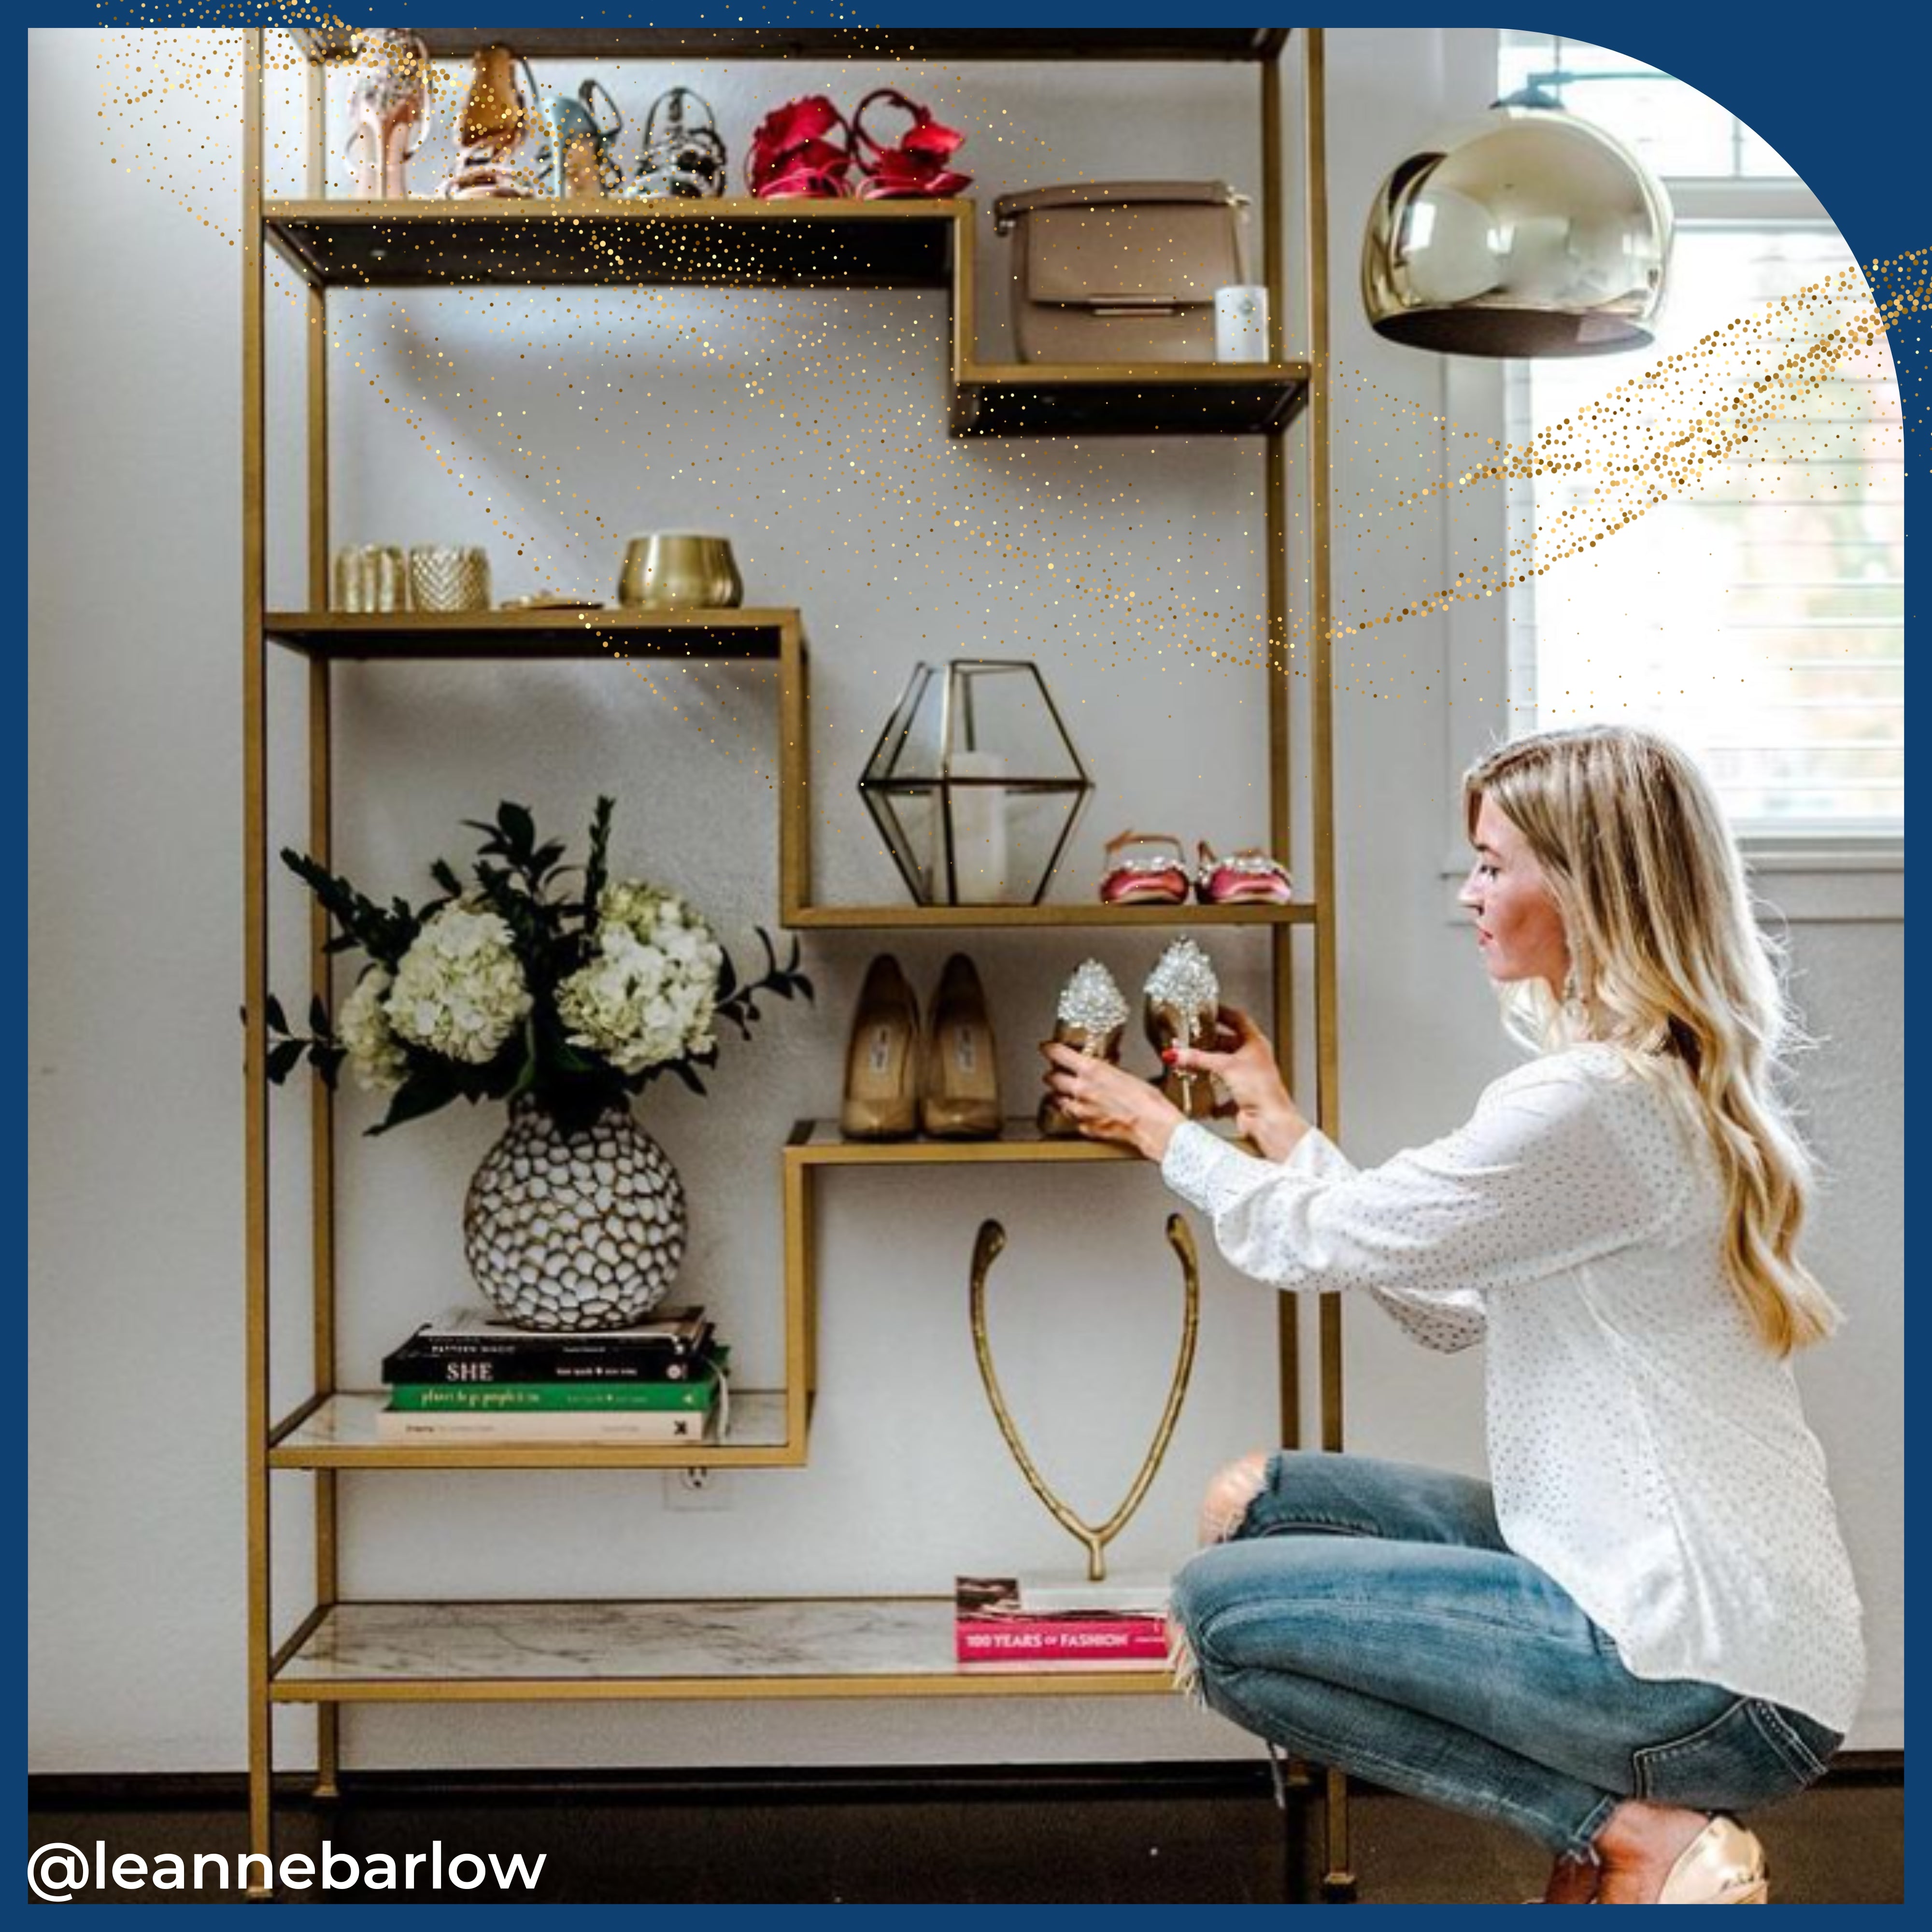 the gold and faux marble shelving unit displays books, vases and more